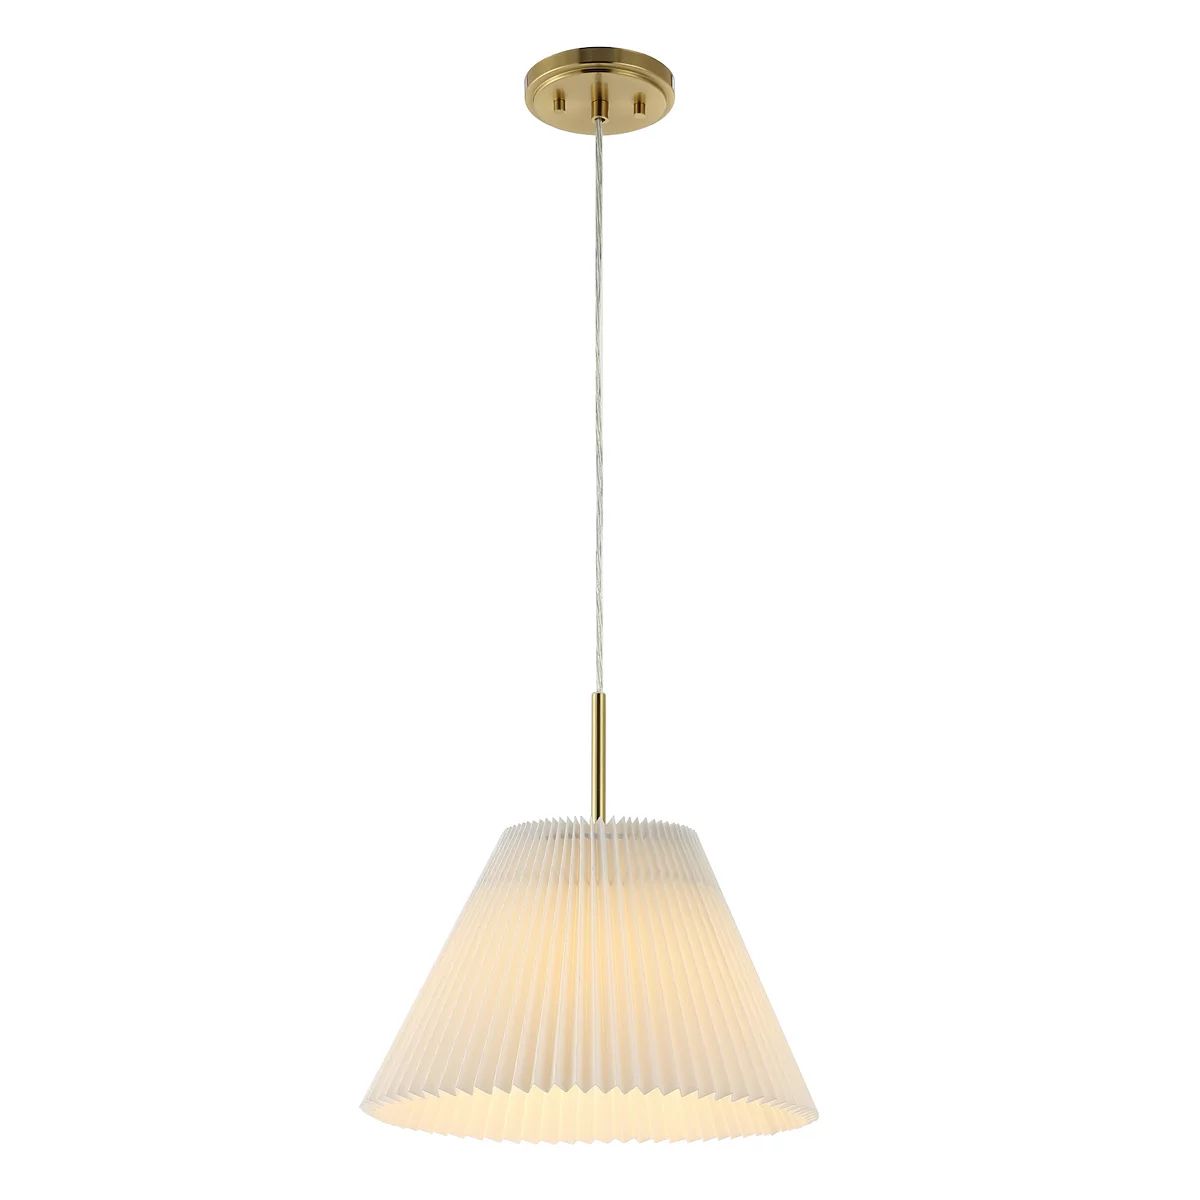 Alden 14.25" 1-light Classic French Country Iron Led Pendant With Pleated Shade, Brass Gold/white | Kohl's